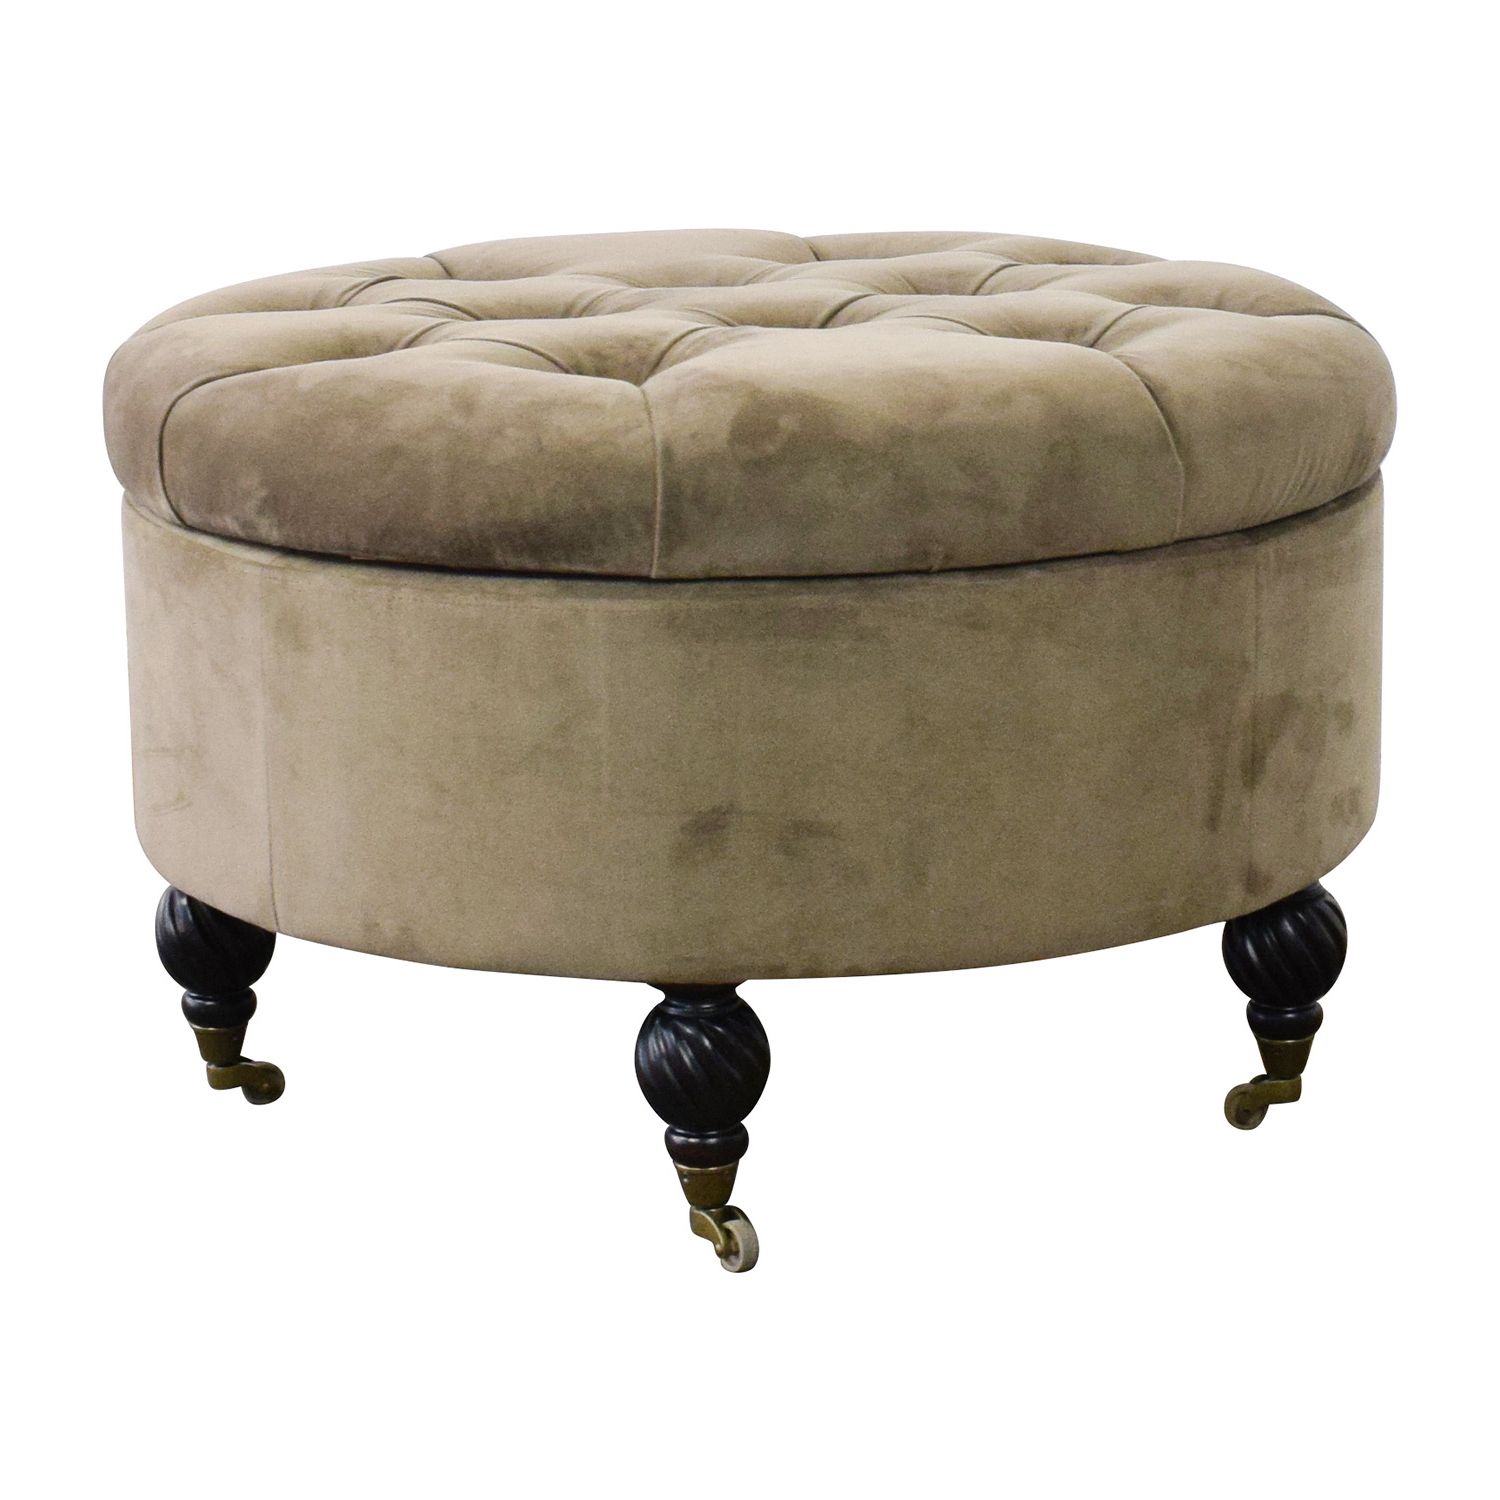 [%55% Off – Frontgate Frontgate Round Tufted Storage Ottoman / Storage Pertaining To Most Recently Released Fabric Tufted Round Storage Ottomans|fabric Tufted Round Storage Ottomans Within Recent 55% Off – Frontgate Frontgate Round Tufted Storage Ottoman / Storage|best And Newest Fabric Tufted Round Storage Ottomans With 55% Off – Frontgate Frontgate Round Tufted Storage Ottoman / Storage|most Recent 55% Off – Frontgate Frontgate Round Tufted Storage Ottoman / Storage For Fabric Tufted Round Storage Ottomans%] (View 2 of 10)